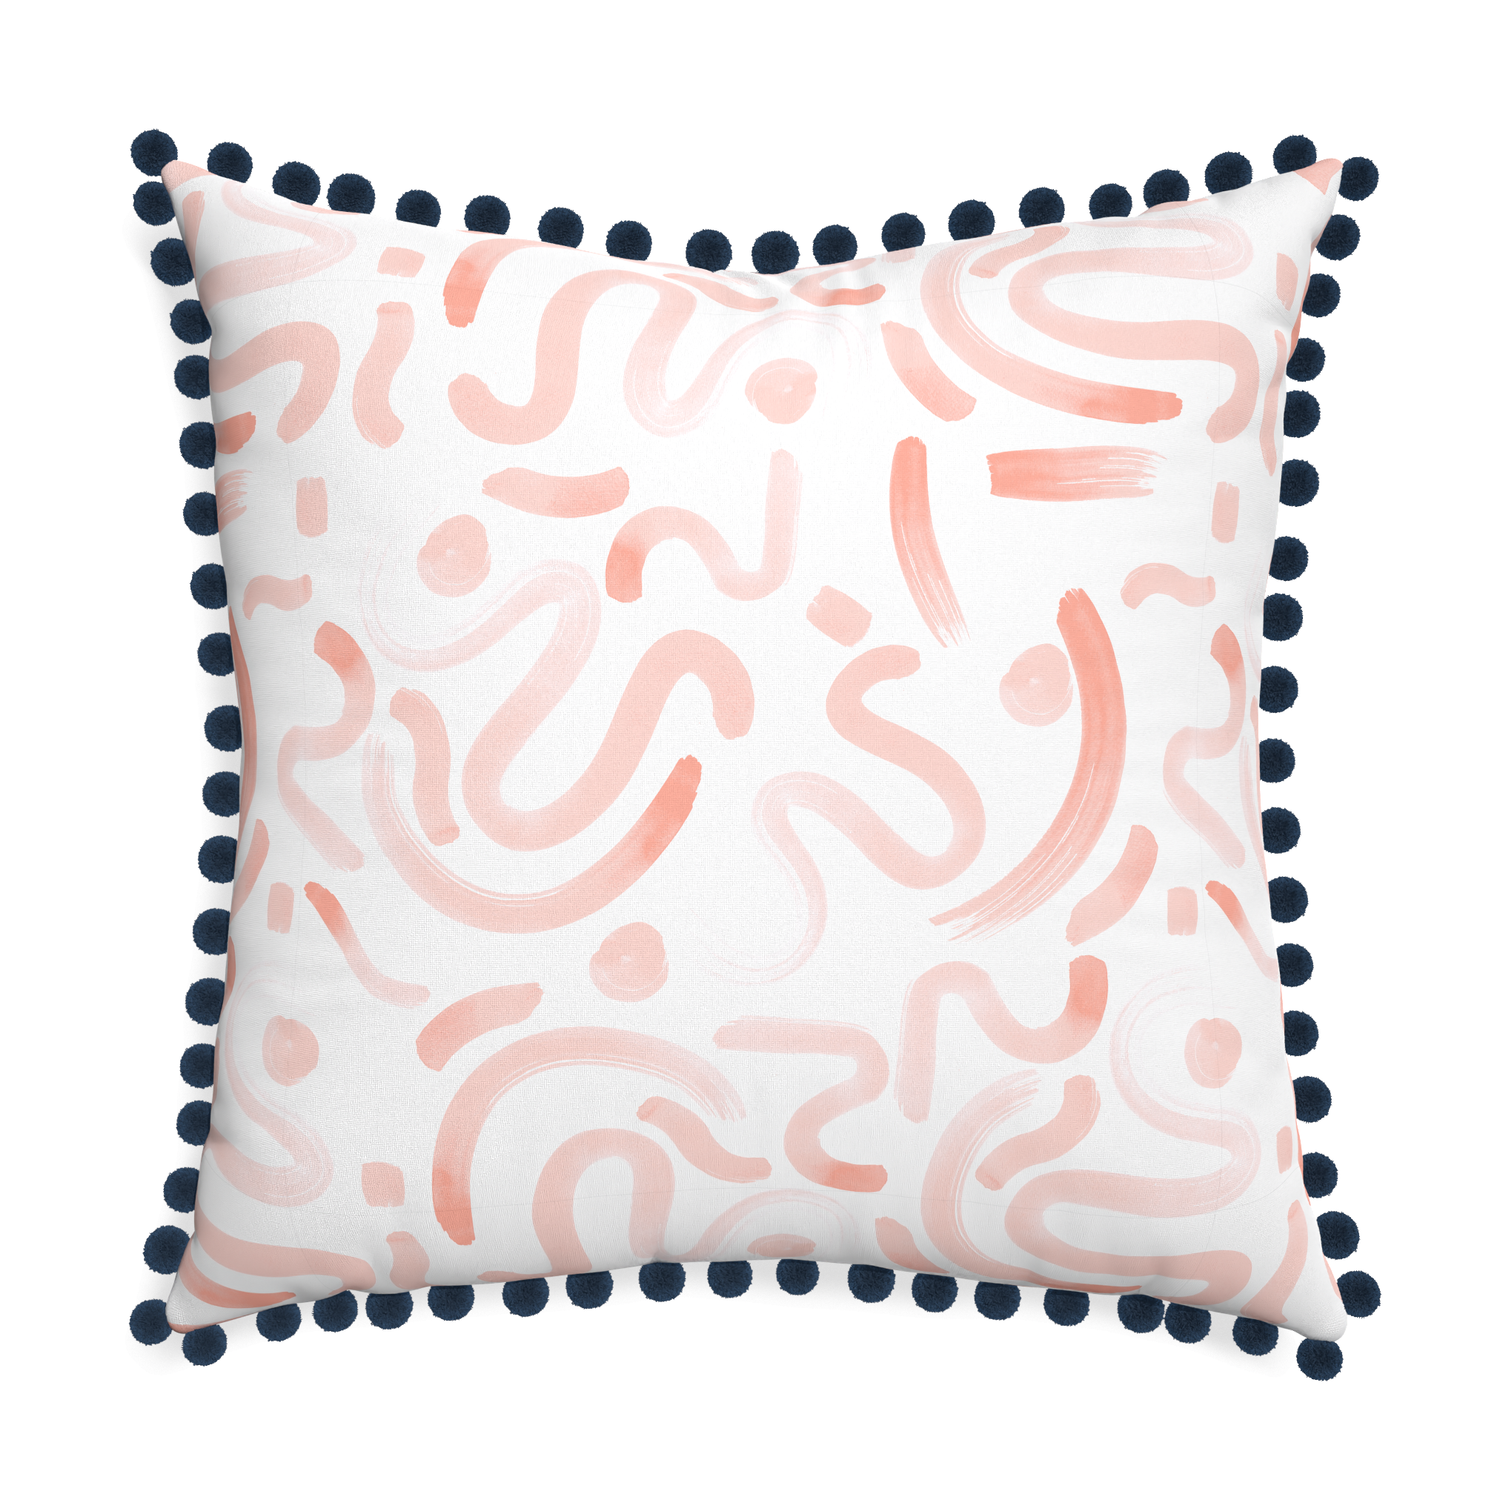 Euro-sham hockney pink custom pink graphicpillow with c on white background